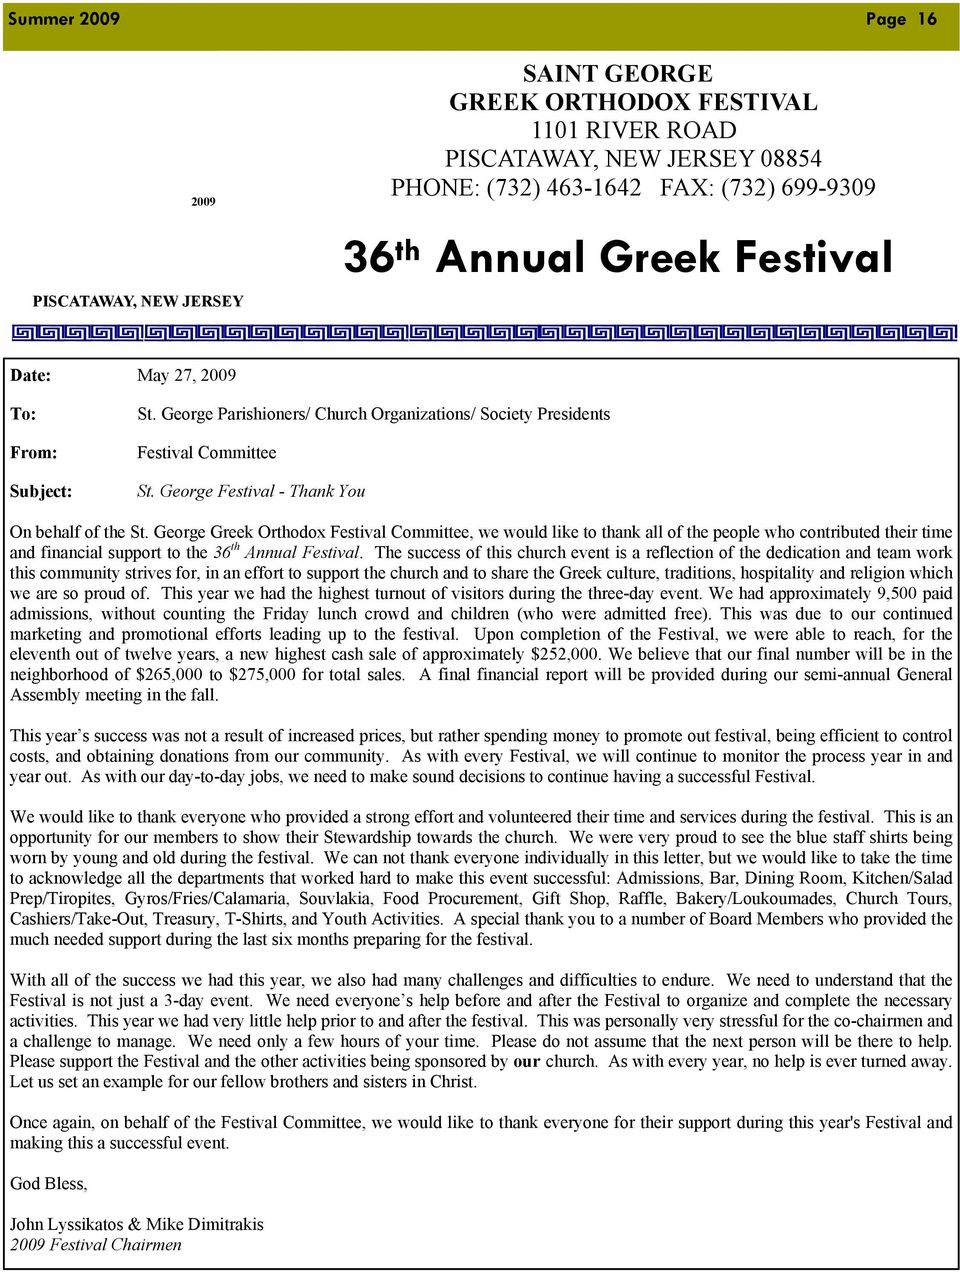 George Greek Orthodox Festival Committee, we would like to thank all of the people who contributed their time and financial support to the 36 th Annual Festival.